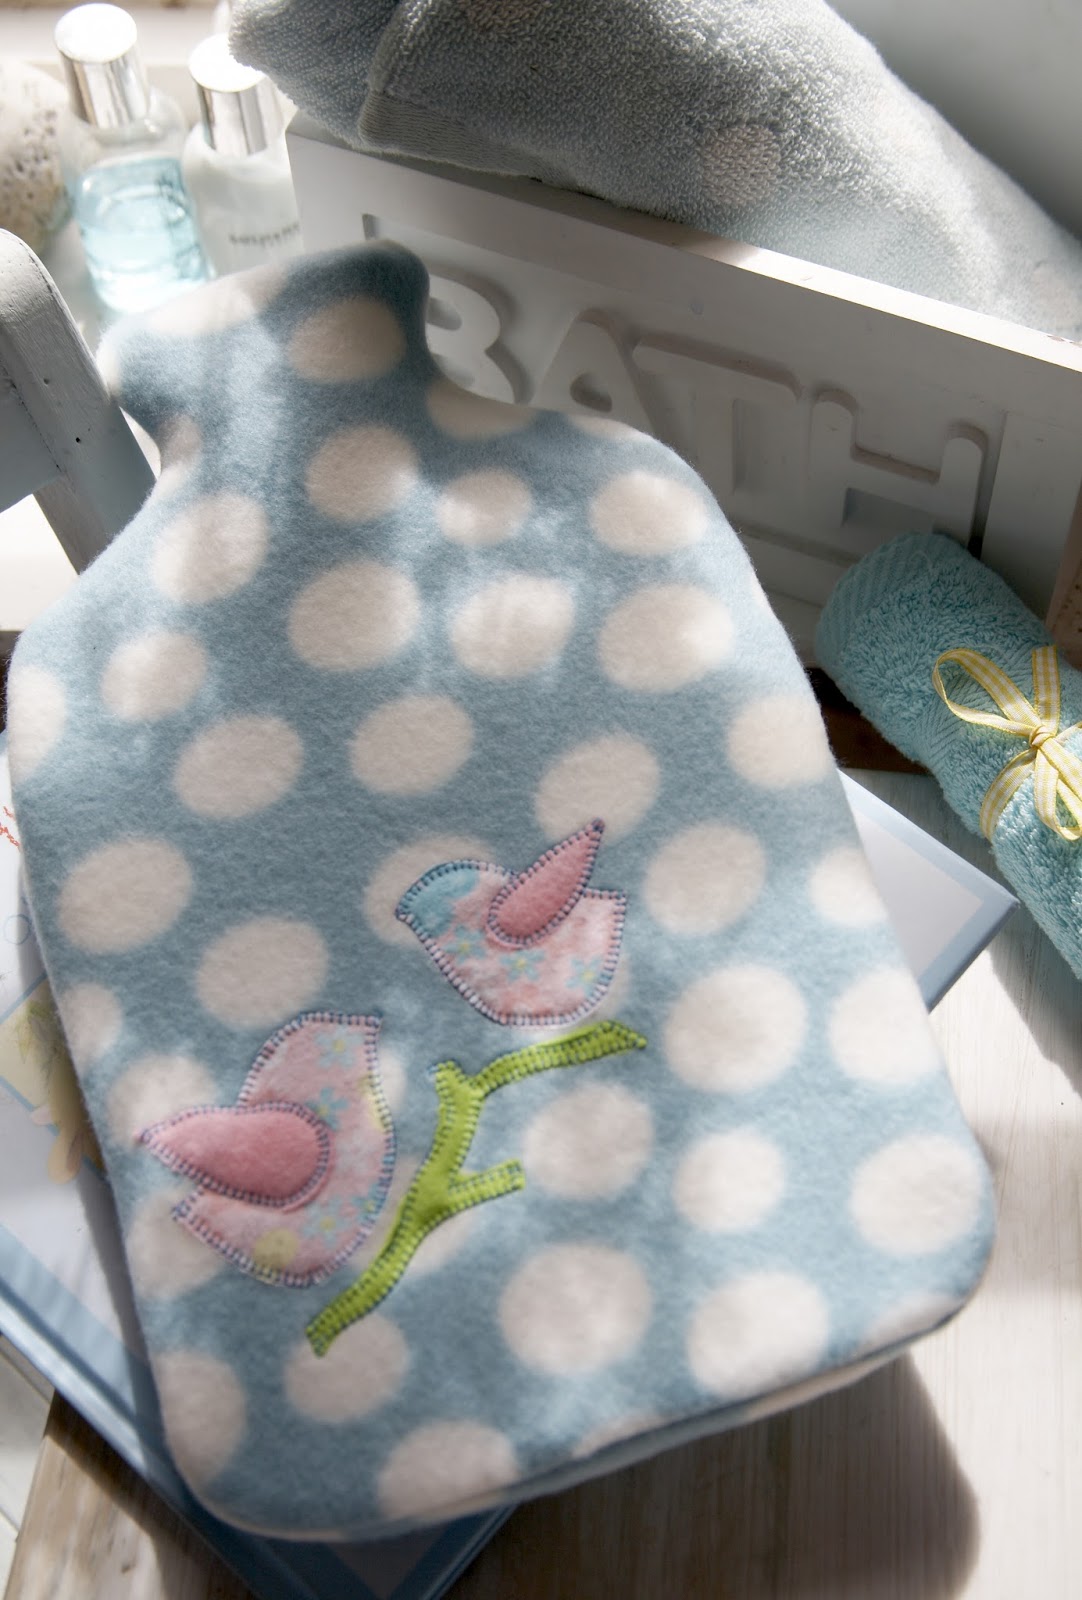 Make a sewing machine dust cover! by Debbie Shore 